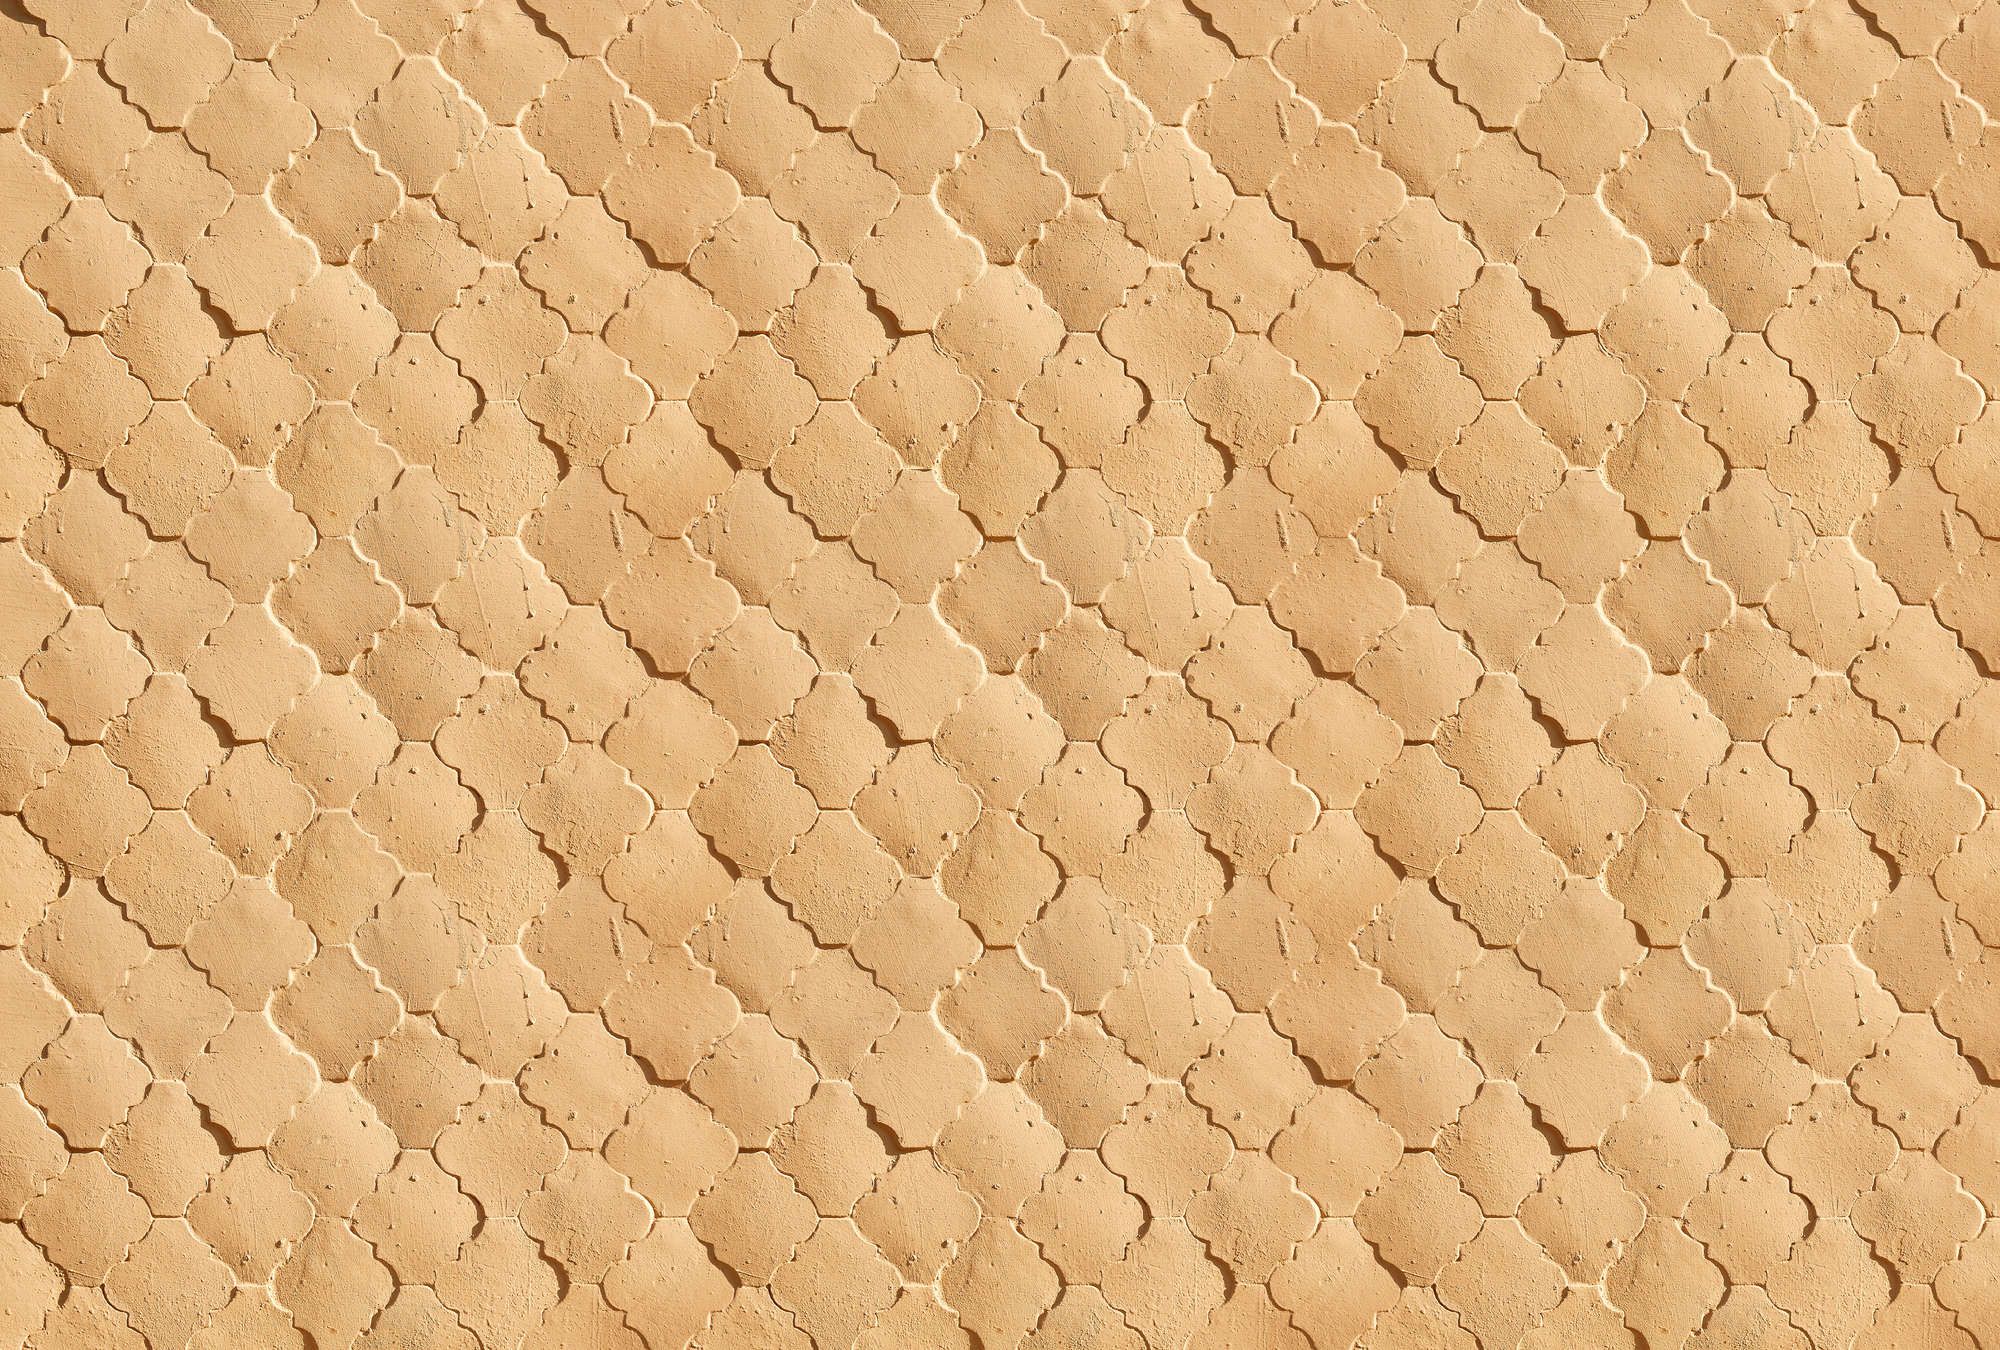             Photo wallpaper »siena« - Mediterranean tile pattern in sand colours - Smooth, slightly shiny premium non-woven fabric
        